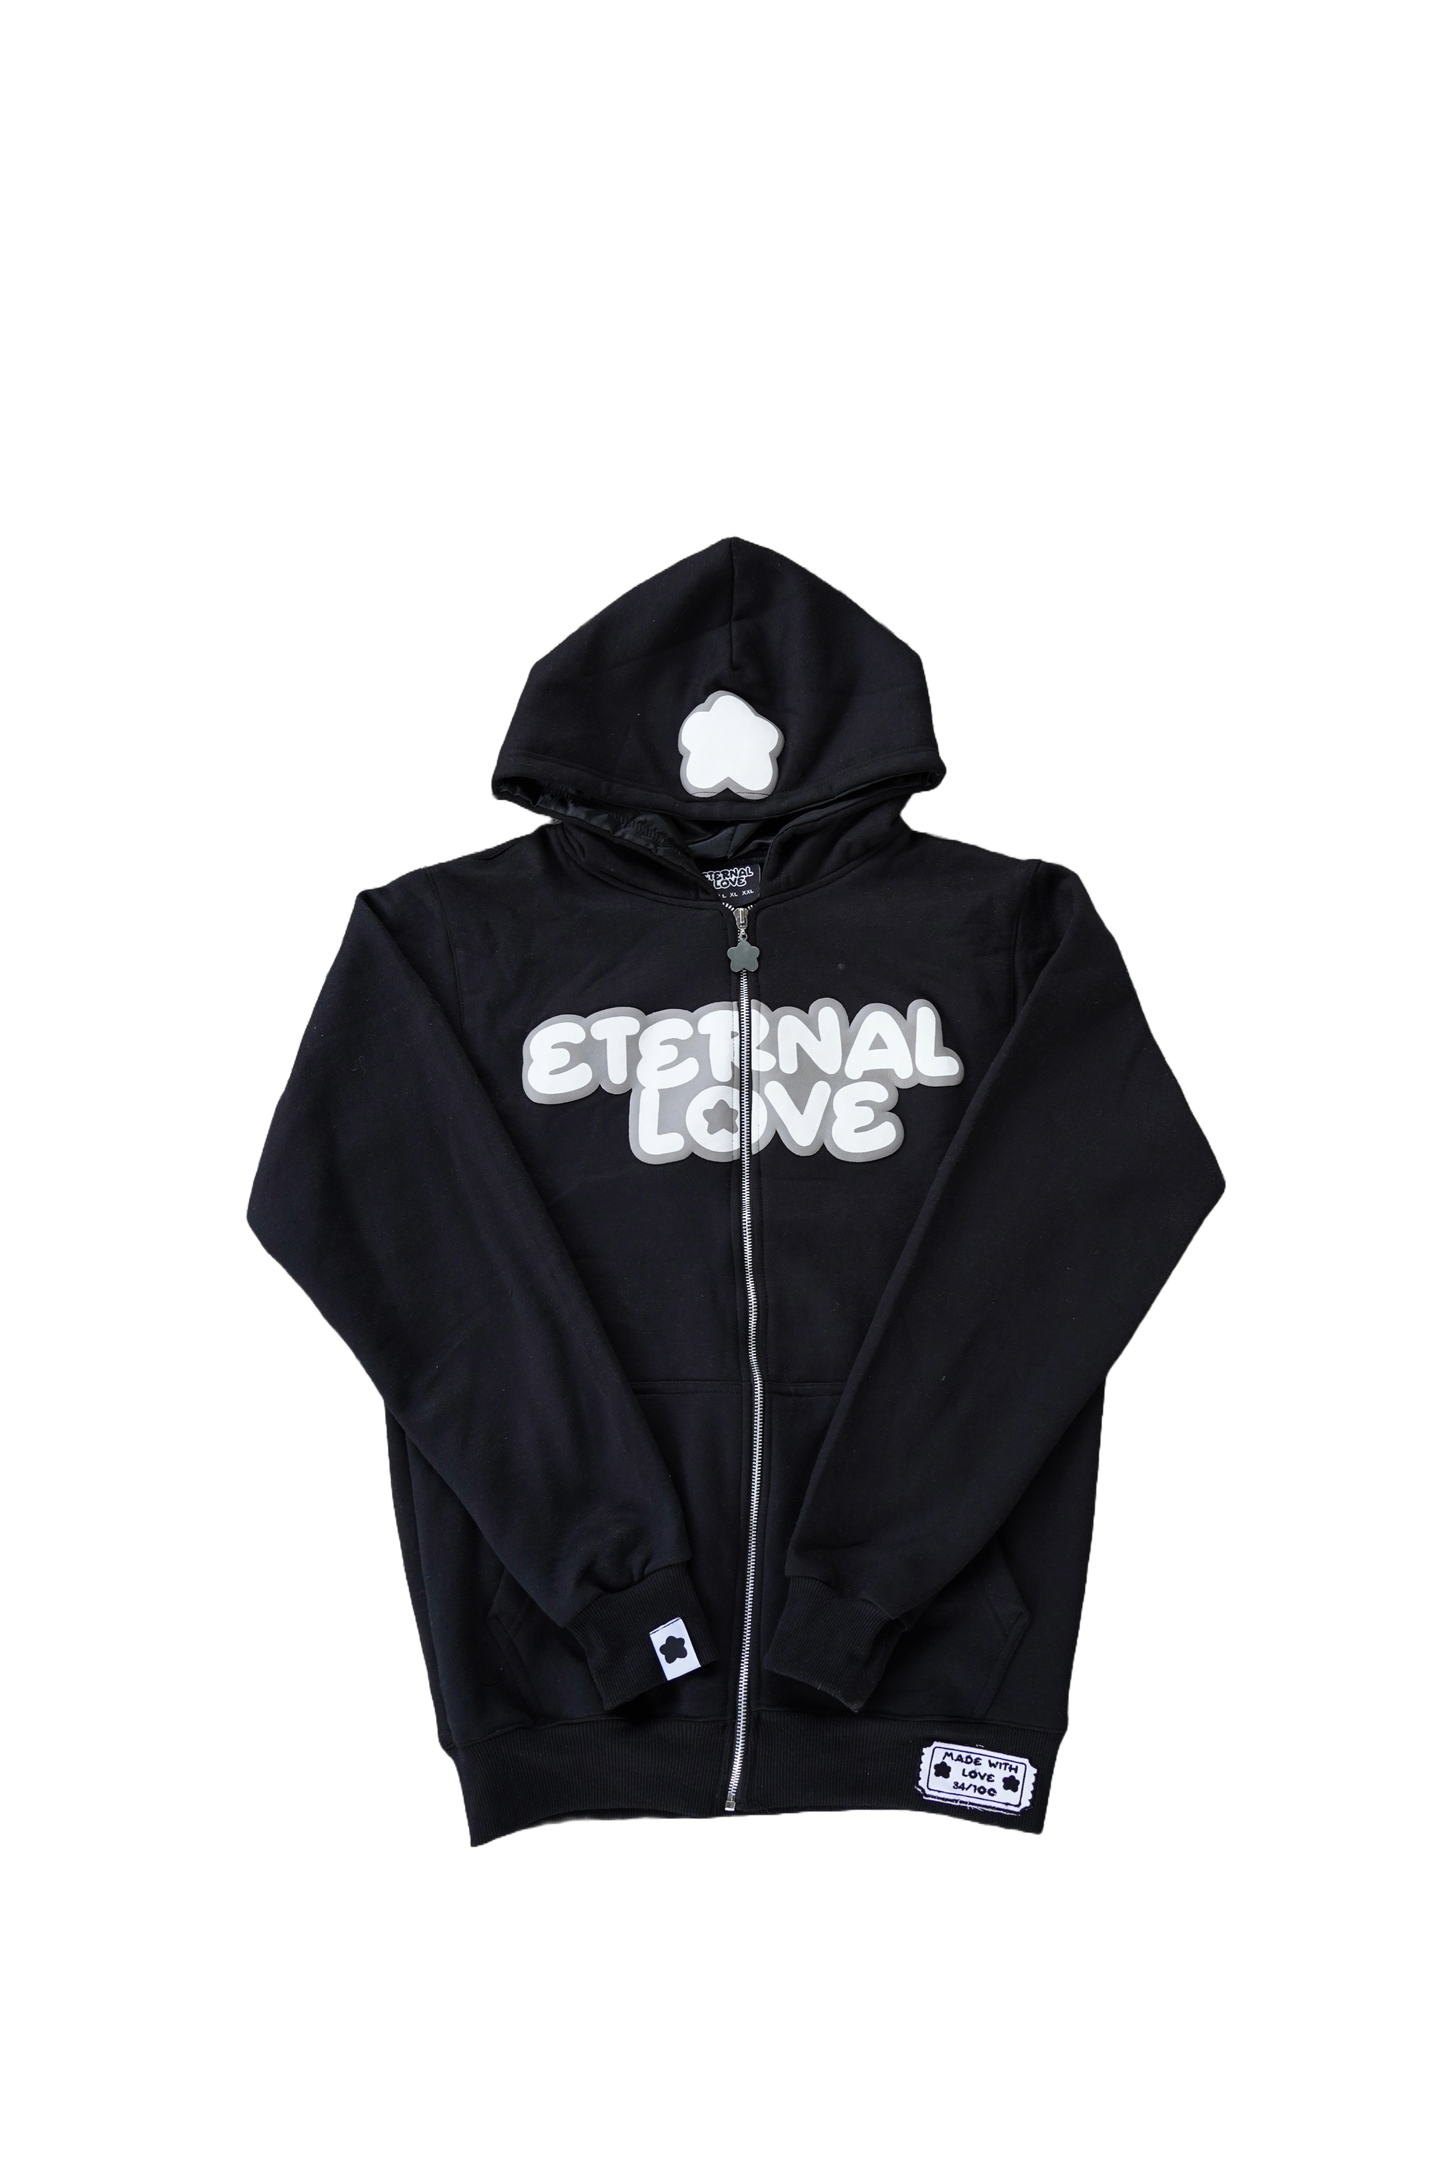 Eternal Love Made With Love Zip-Up - Oreo Colorway